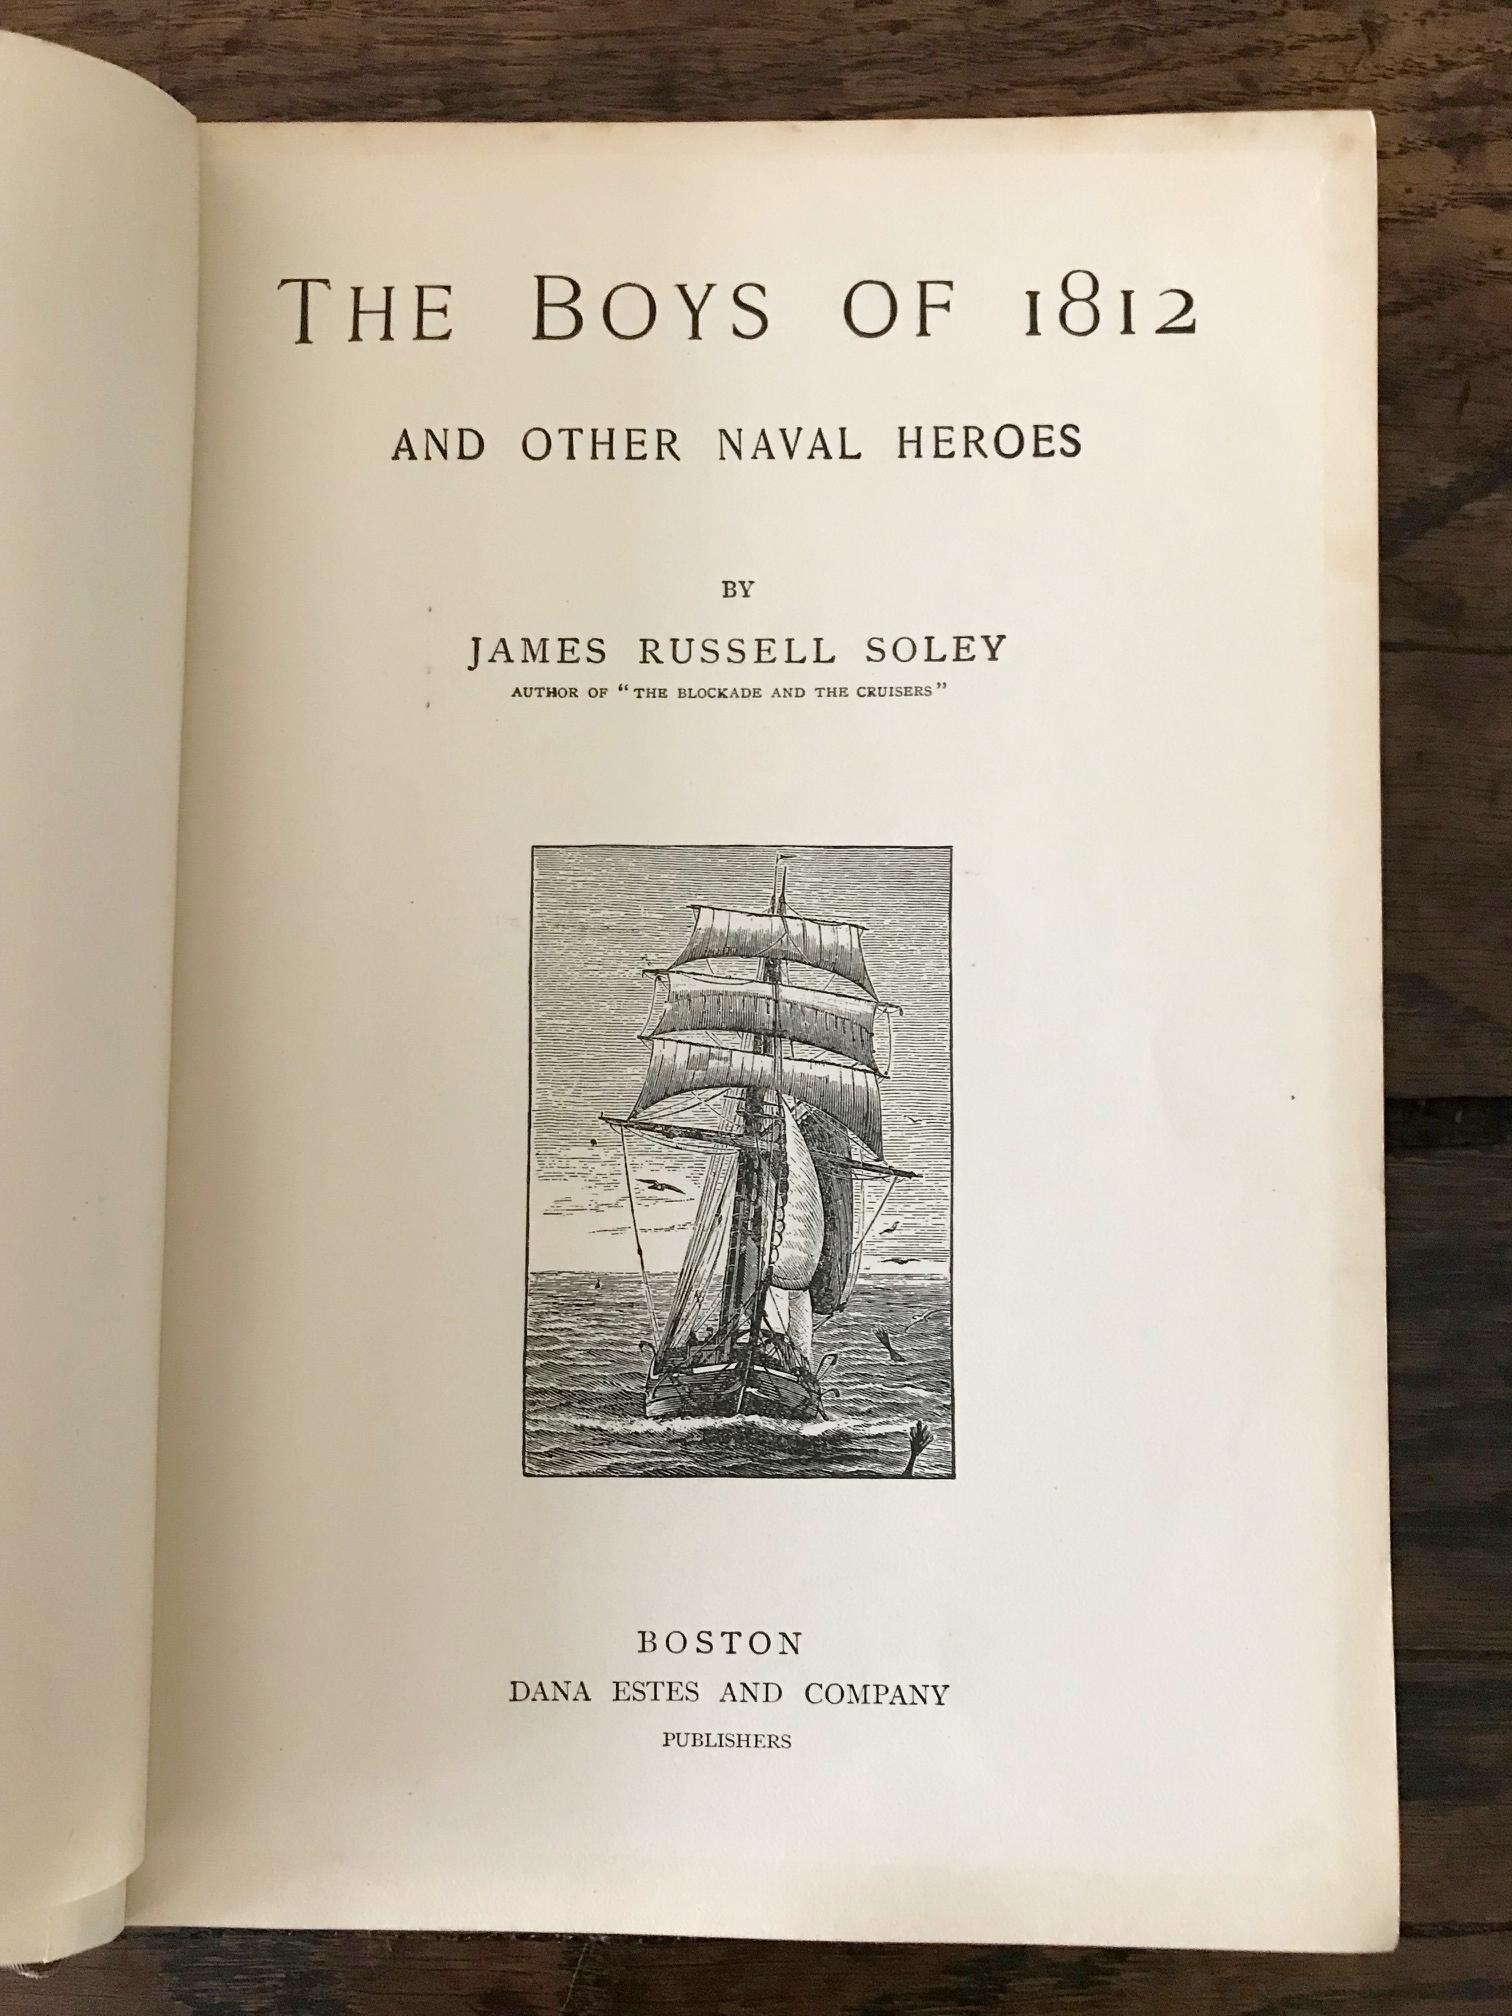 Late 19th Century Rare Navel Book, The Boys of 1812 by James Russell Soley, Copyright 1888 For Sale